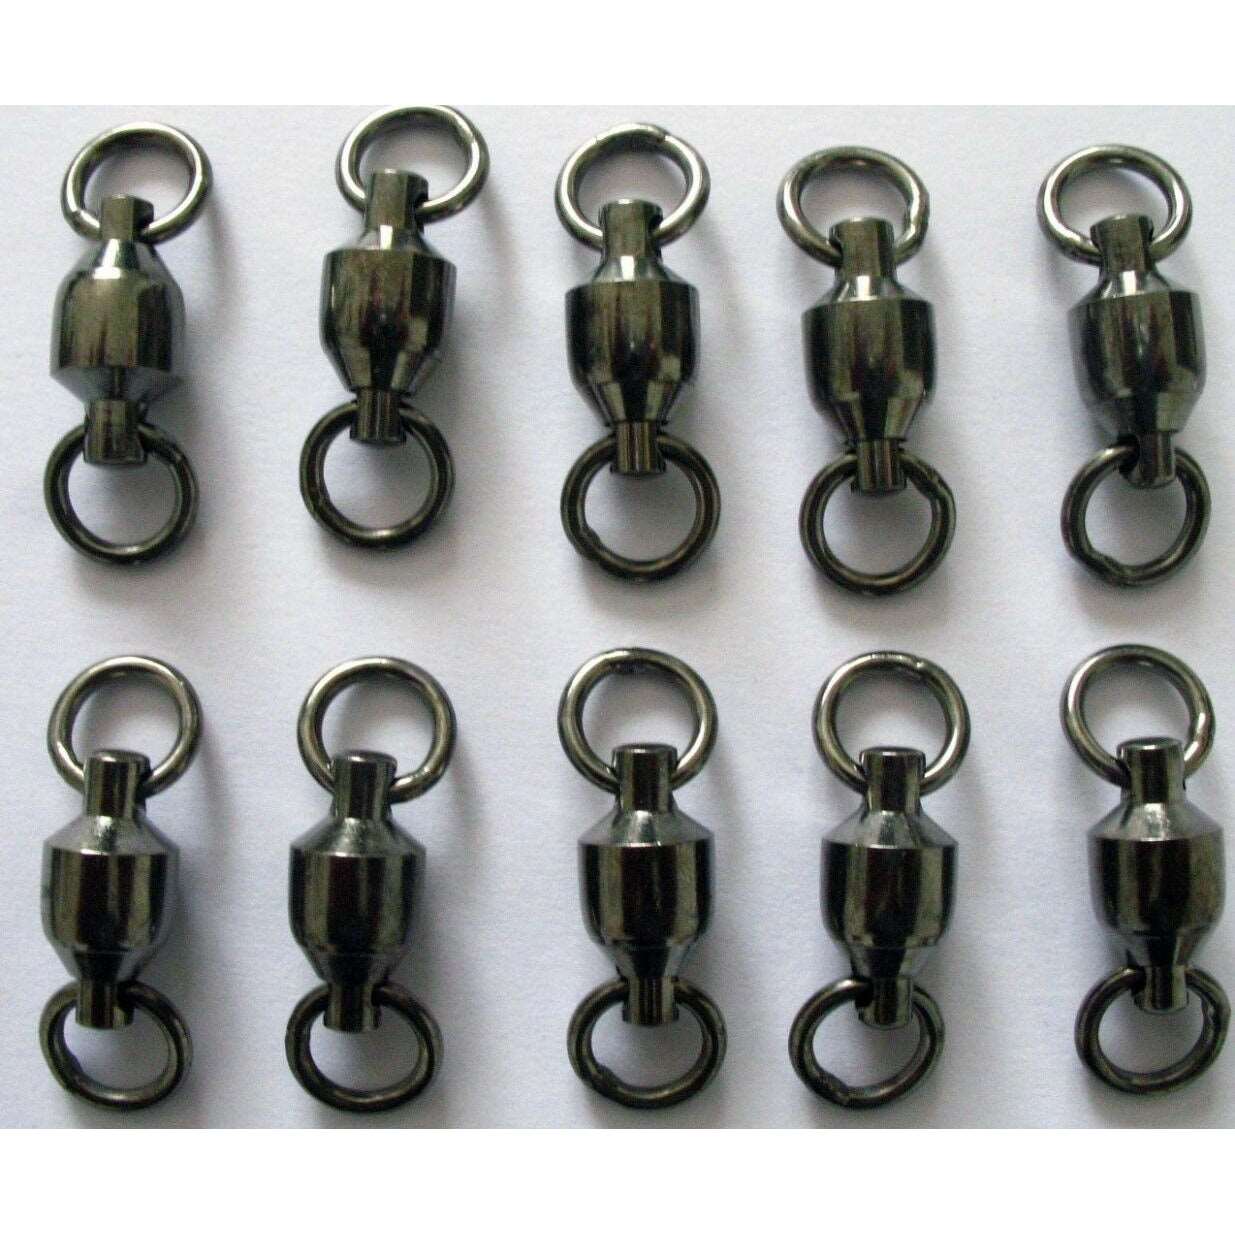 10 X Ball Bearing Swivels Size 6# For Game Fishing Tackle